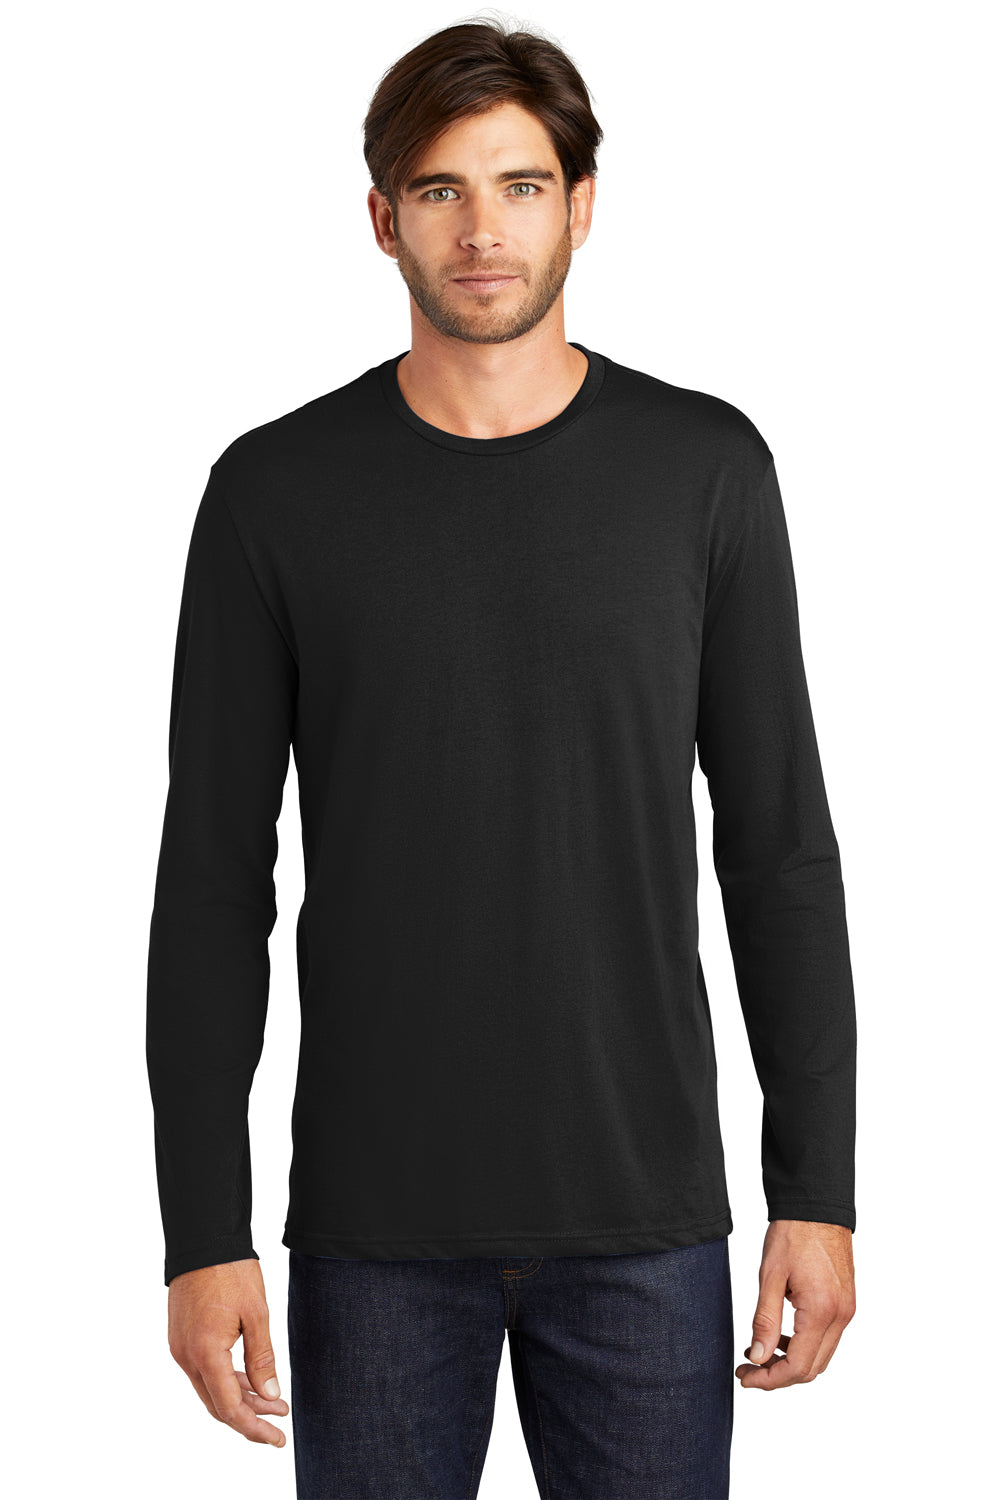 District DT105 Mens Perfect Weight Long Sleeve Crewneck T-Shirt Black Front